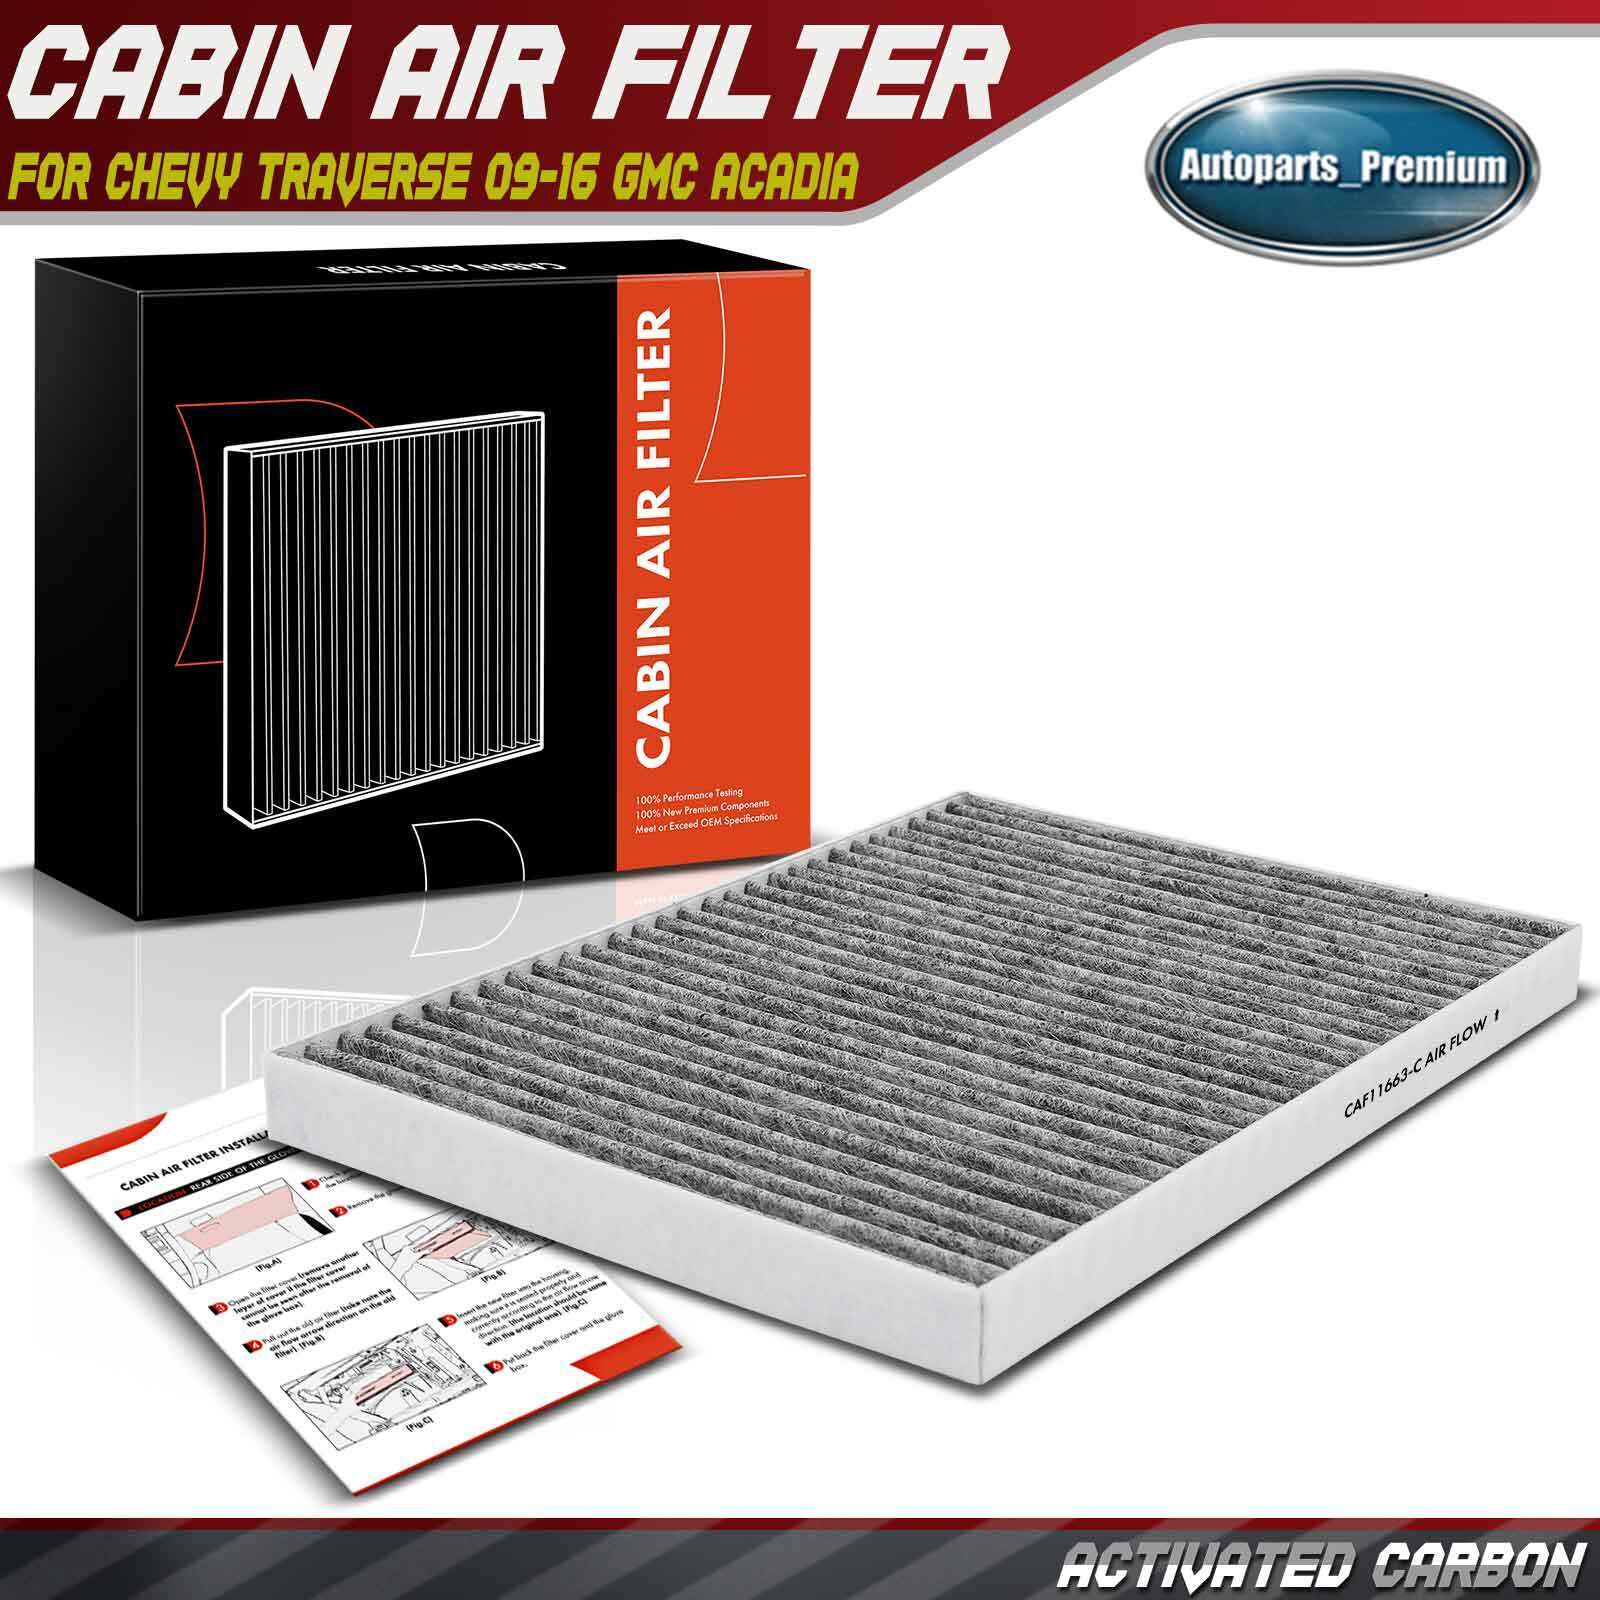 Activated Carbon Cabin Air Filter for Chevrolet Traverse GMC Acadia Buick Saturn